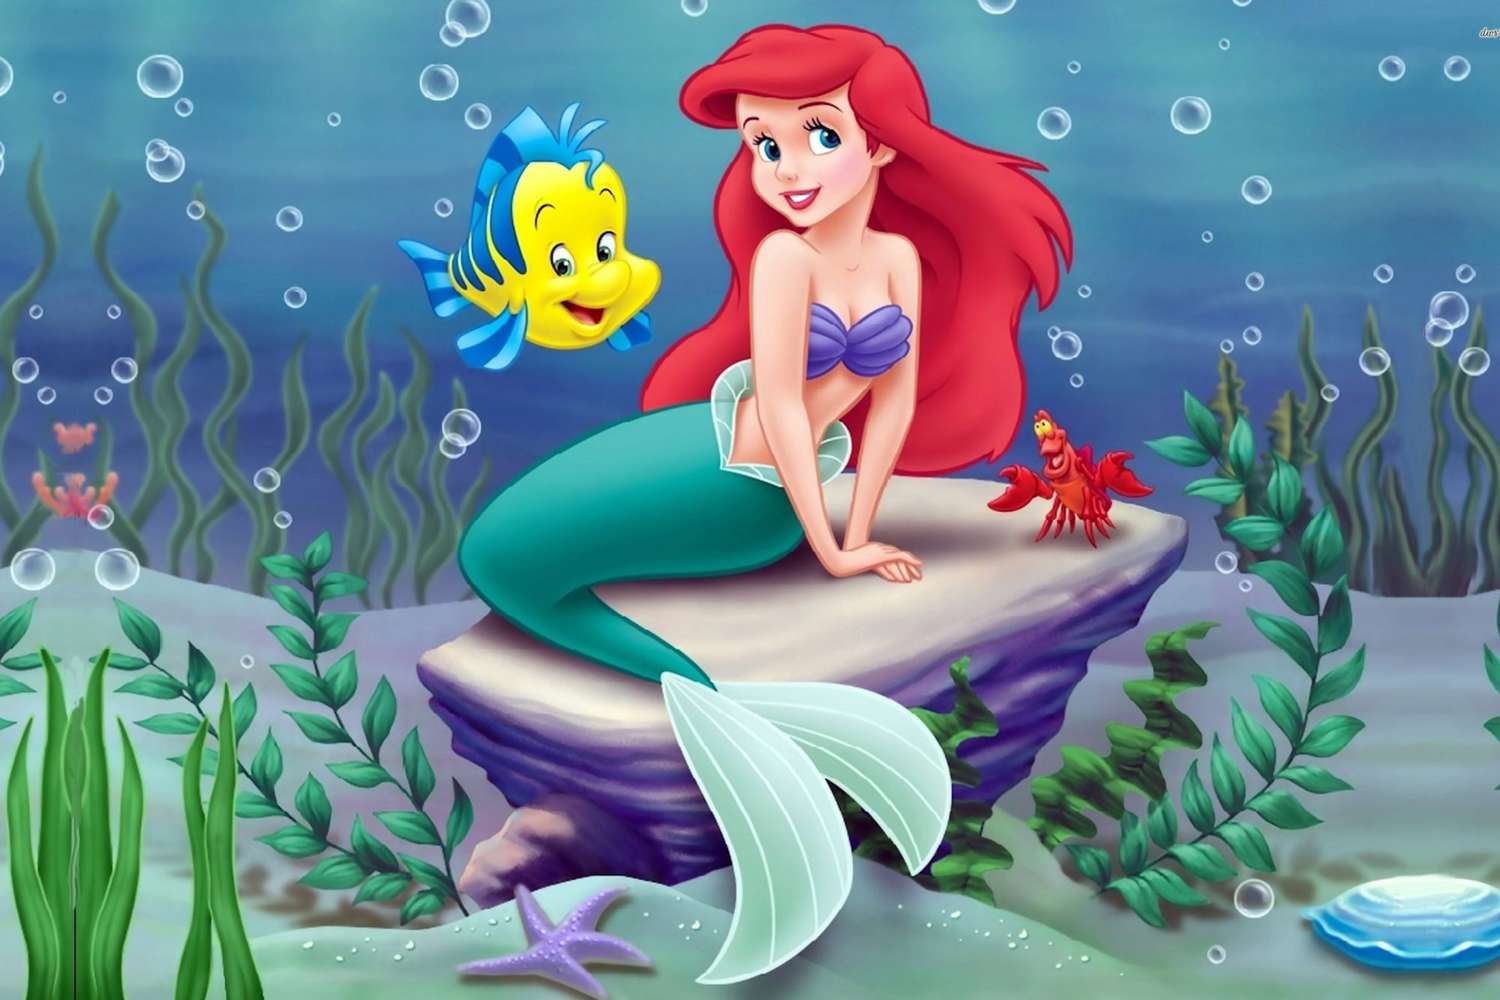 anjan kanti das recommends pics of ariel the little mermaid pic